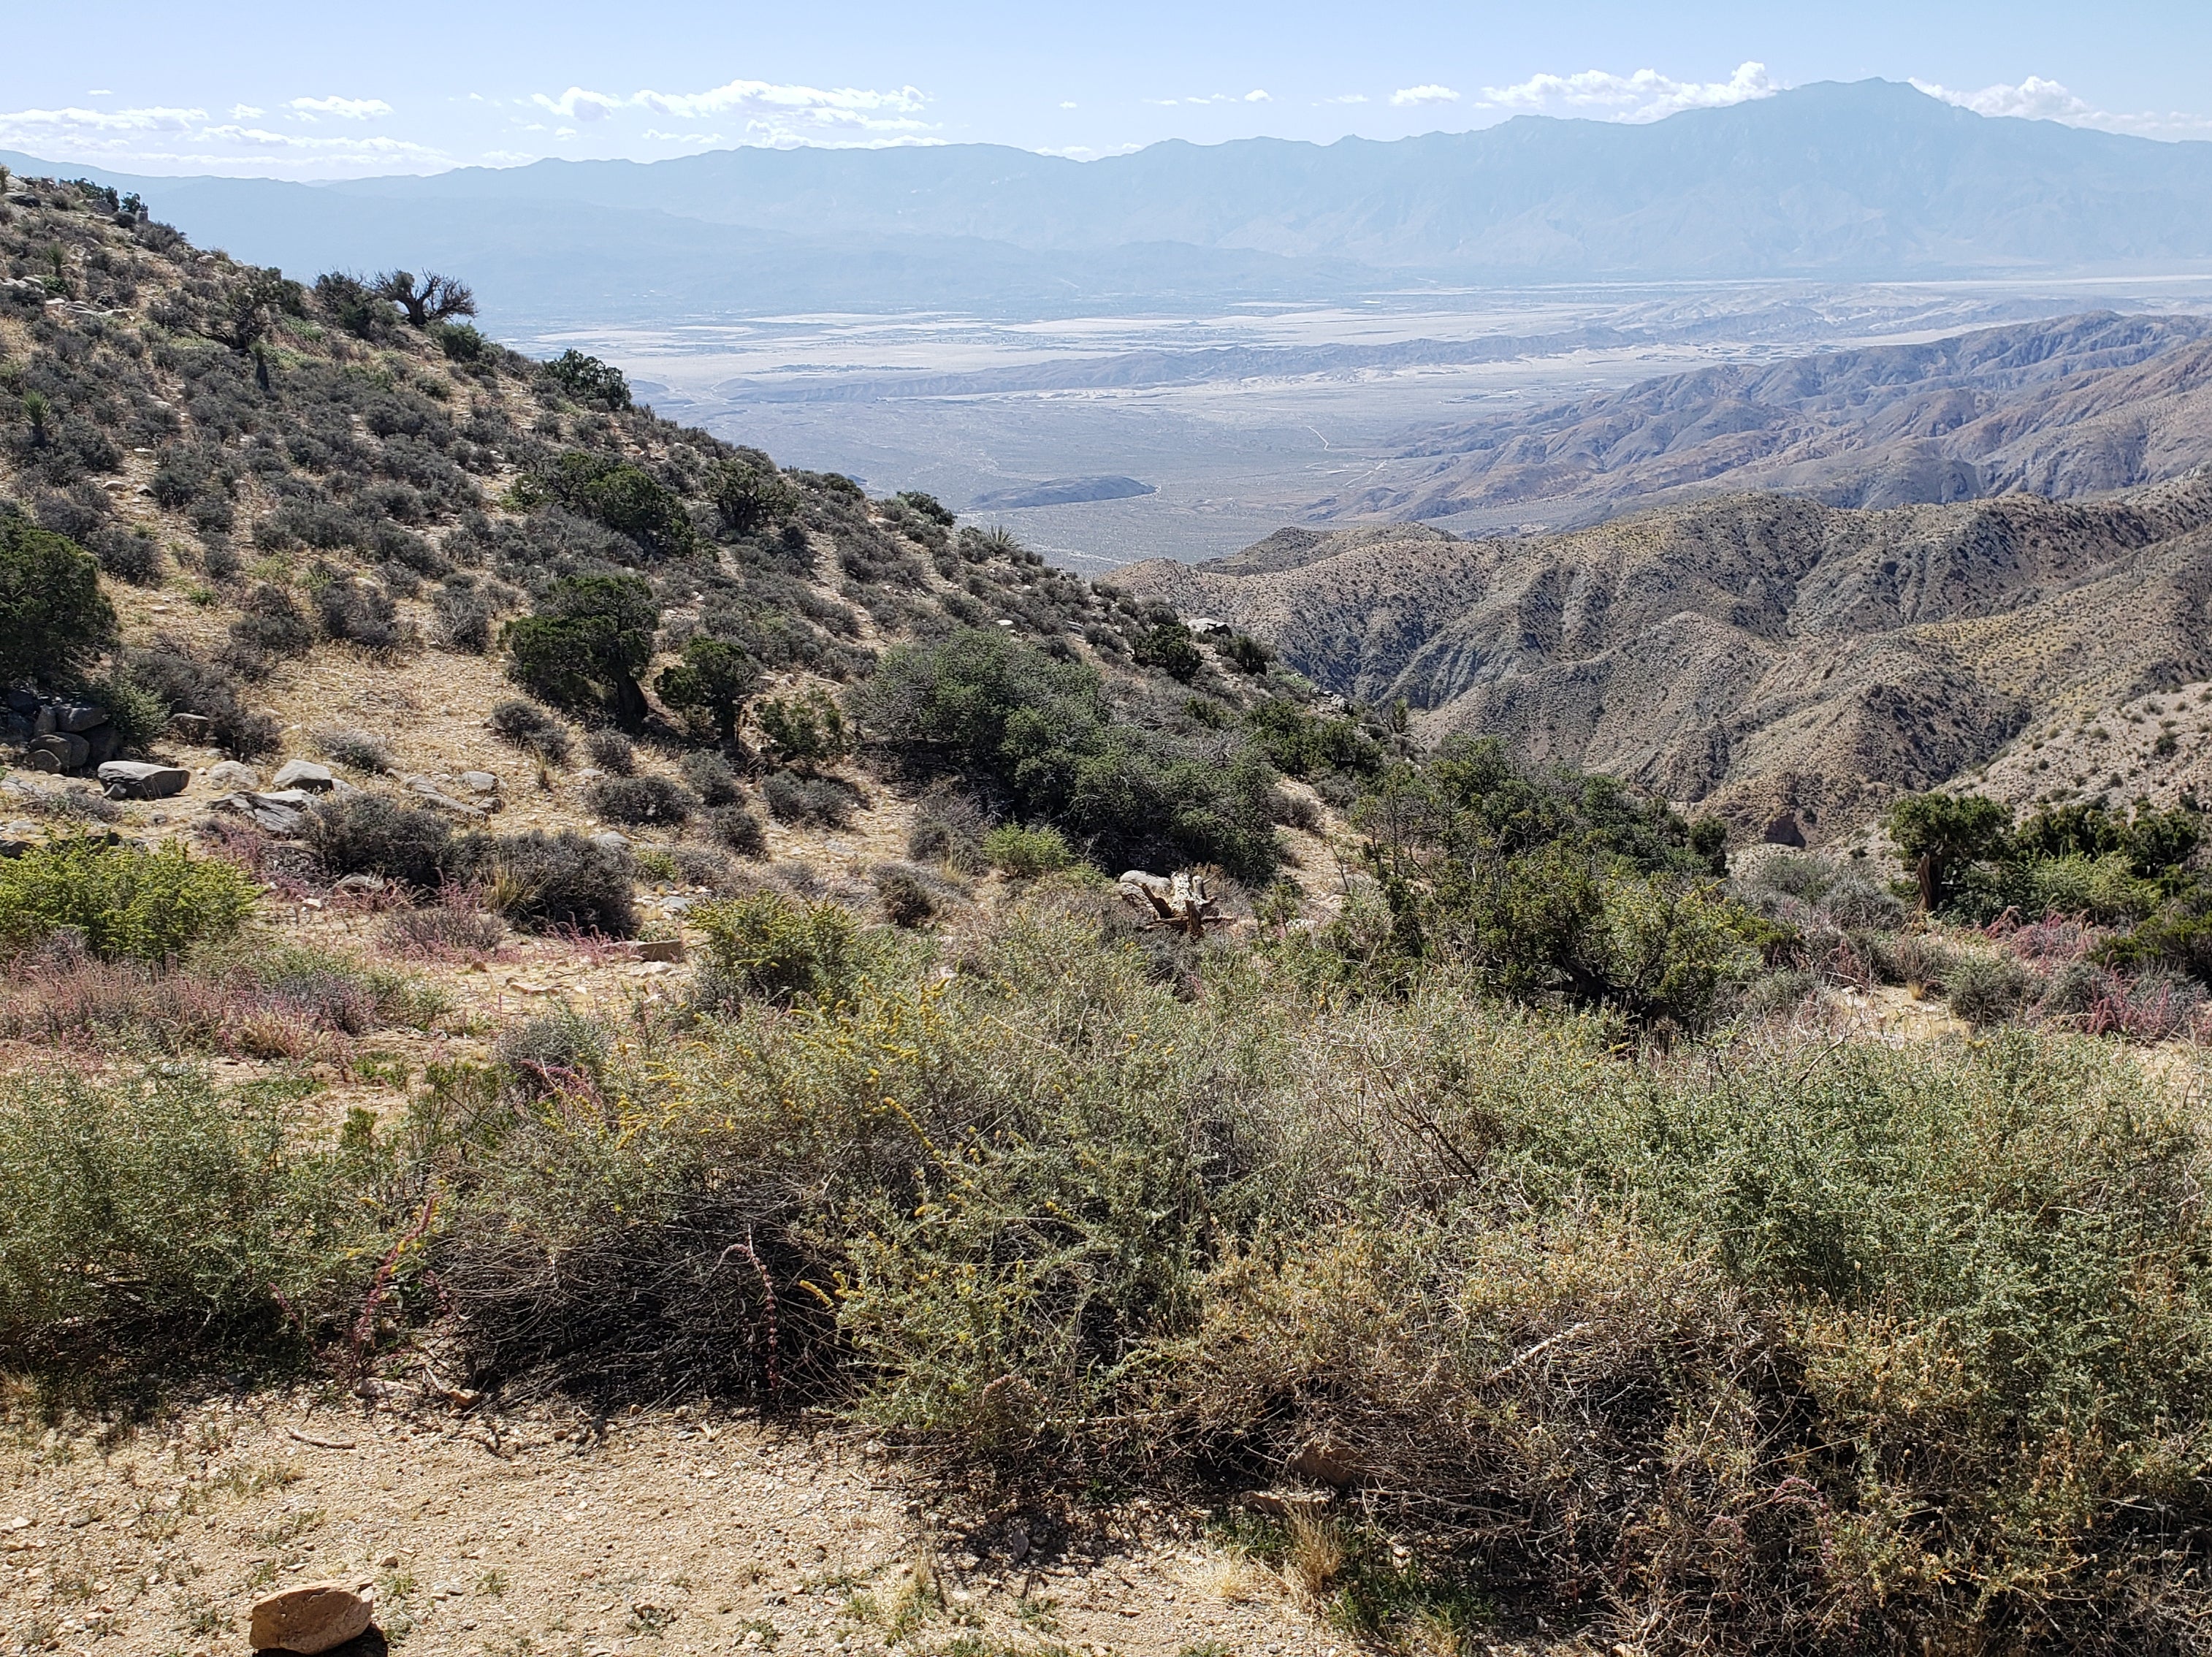 Looking across the Palm Springs Valley and San Andreas Fault Line from Joshua Tree National Park